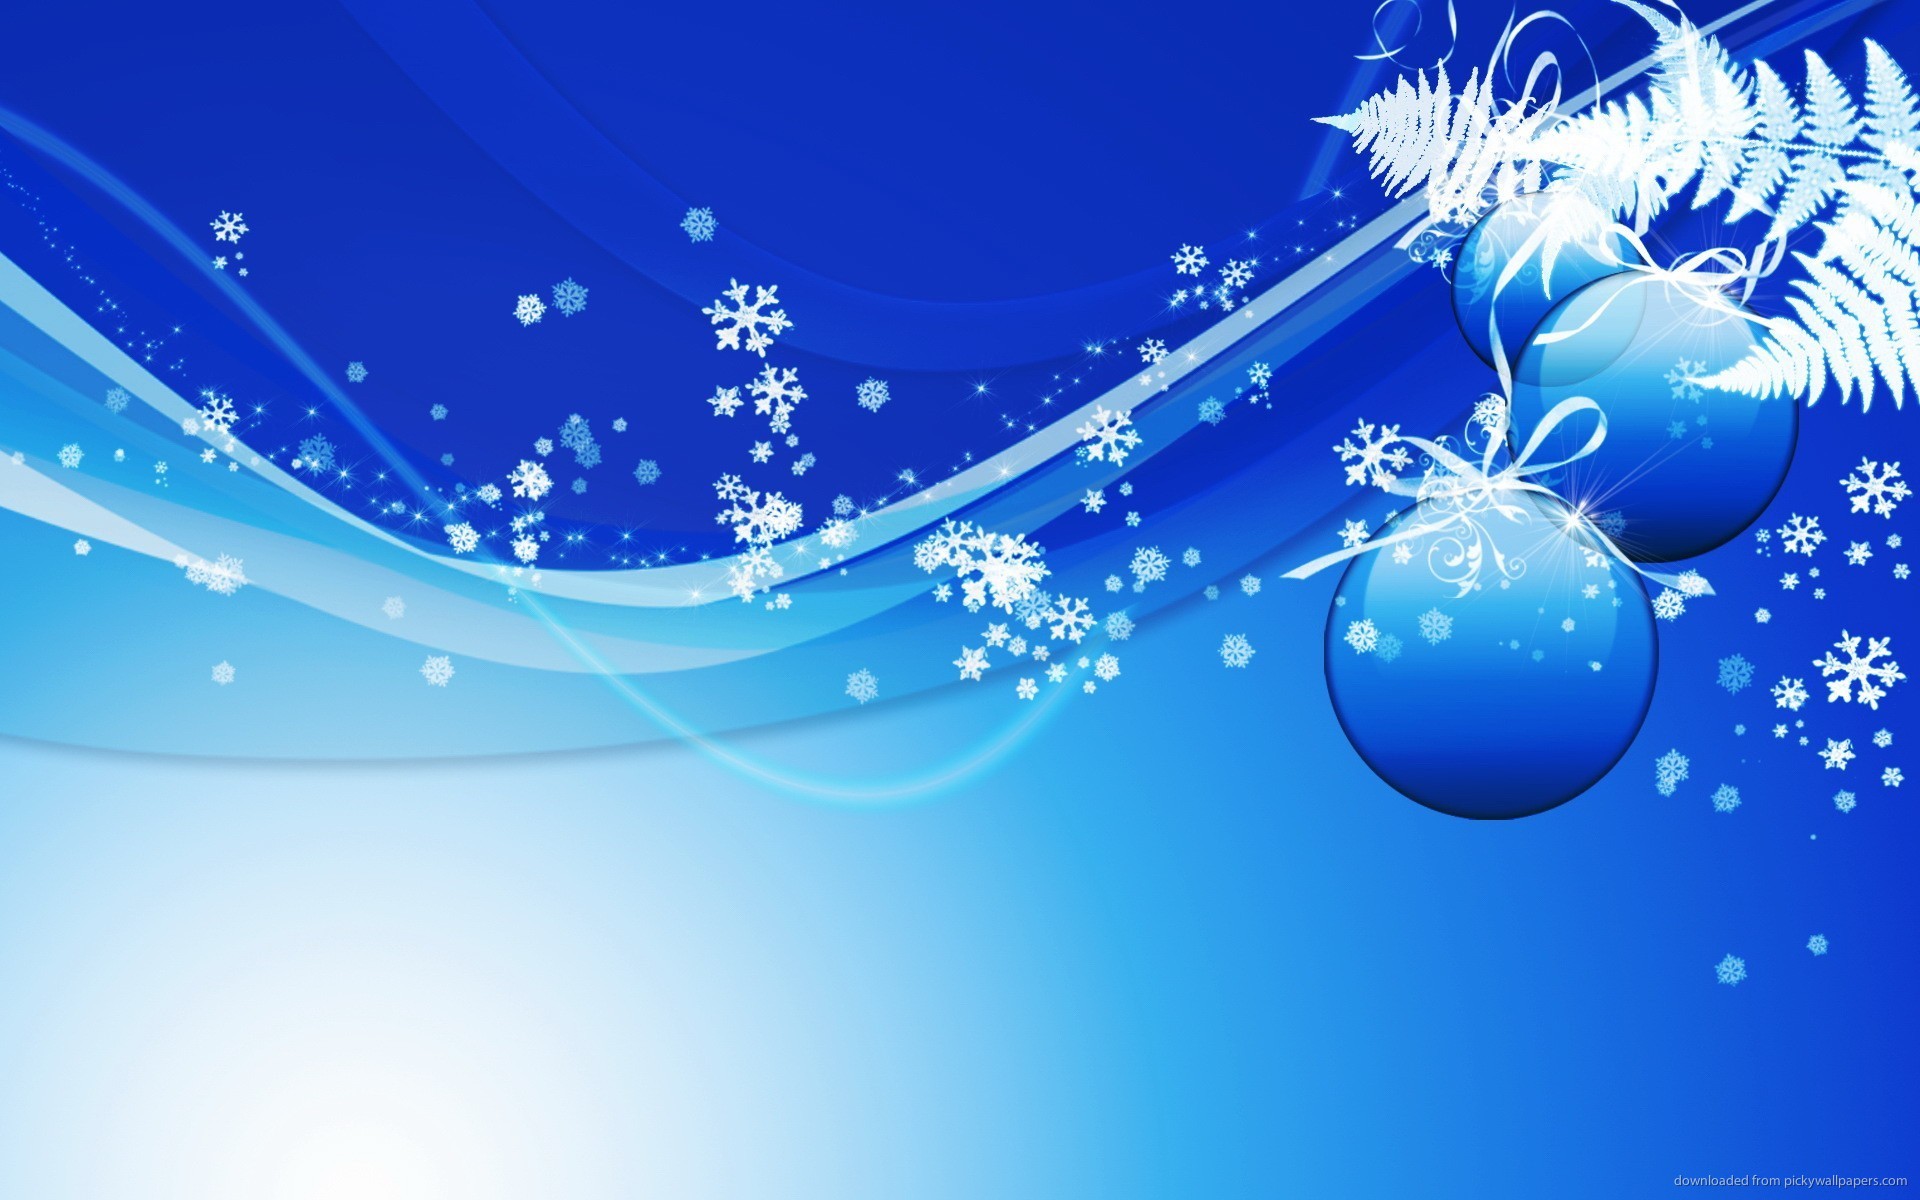 75770 Christmas Wallpaper Stock Photos HighRes Pictures and Images   Getty Images